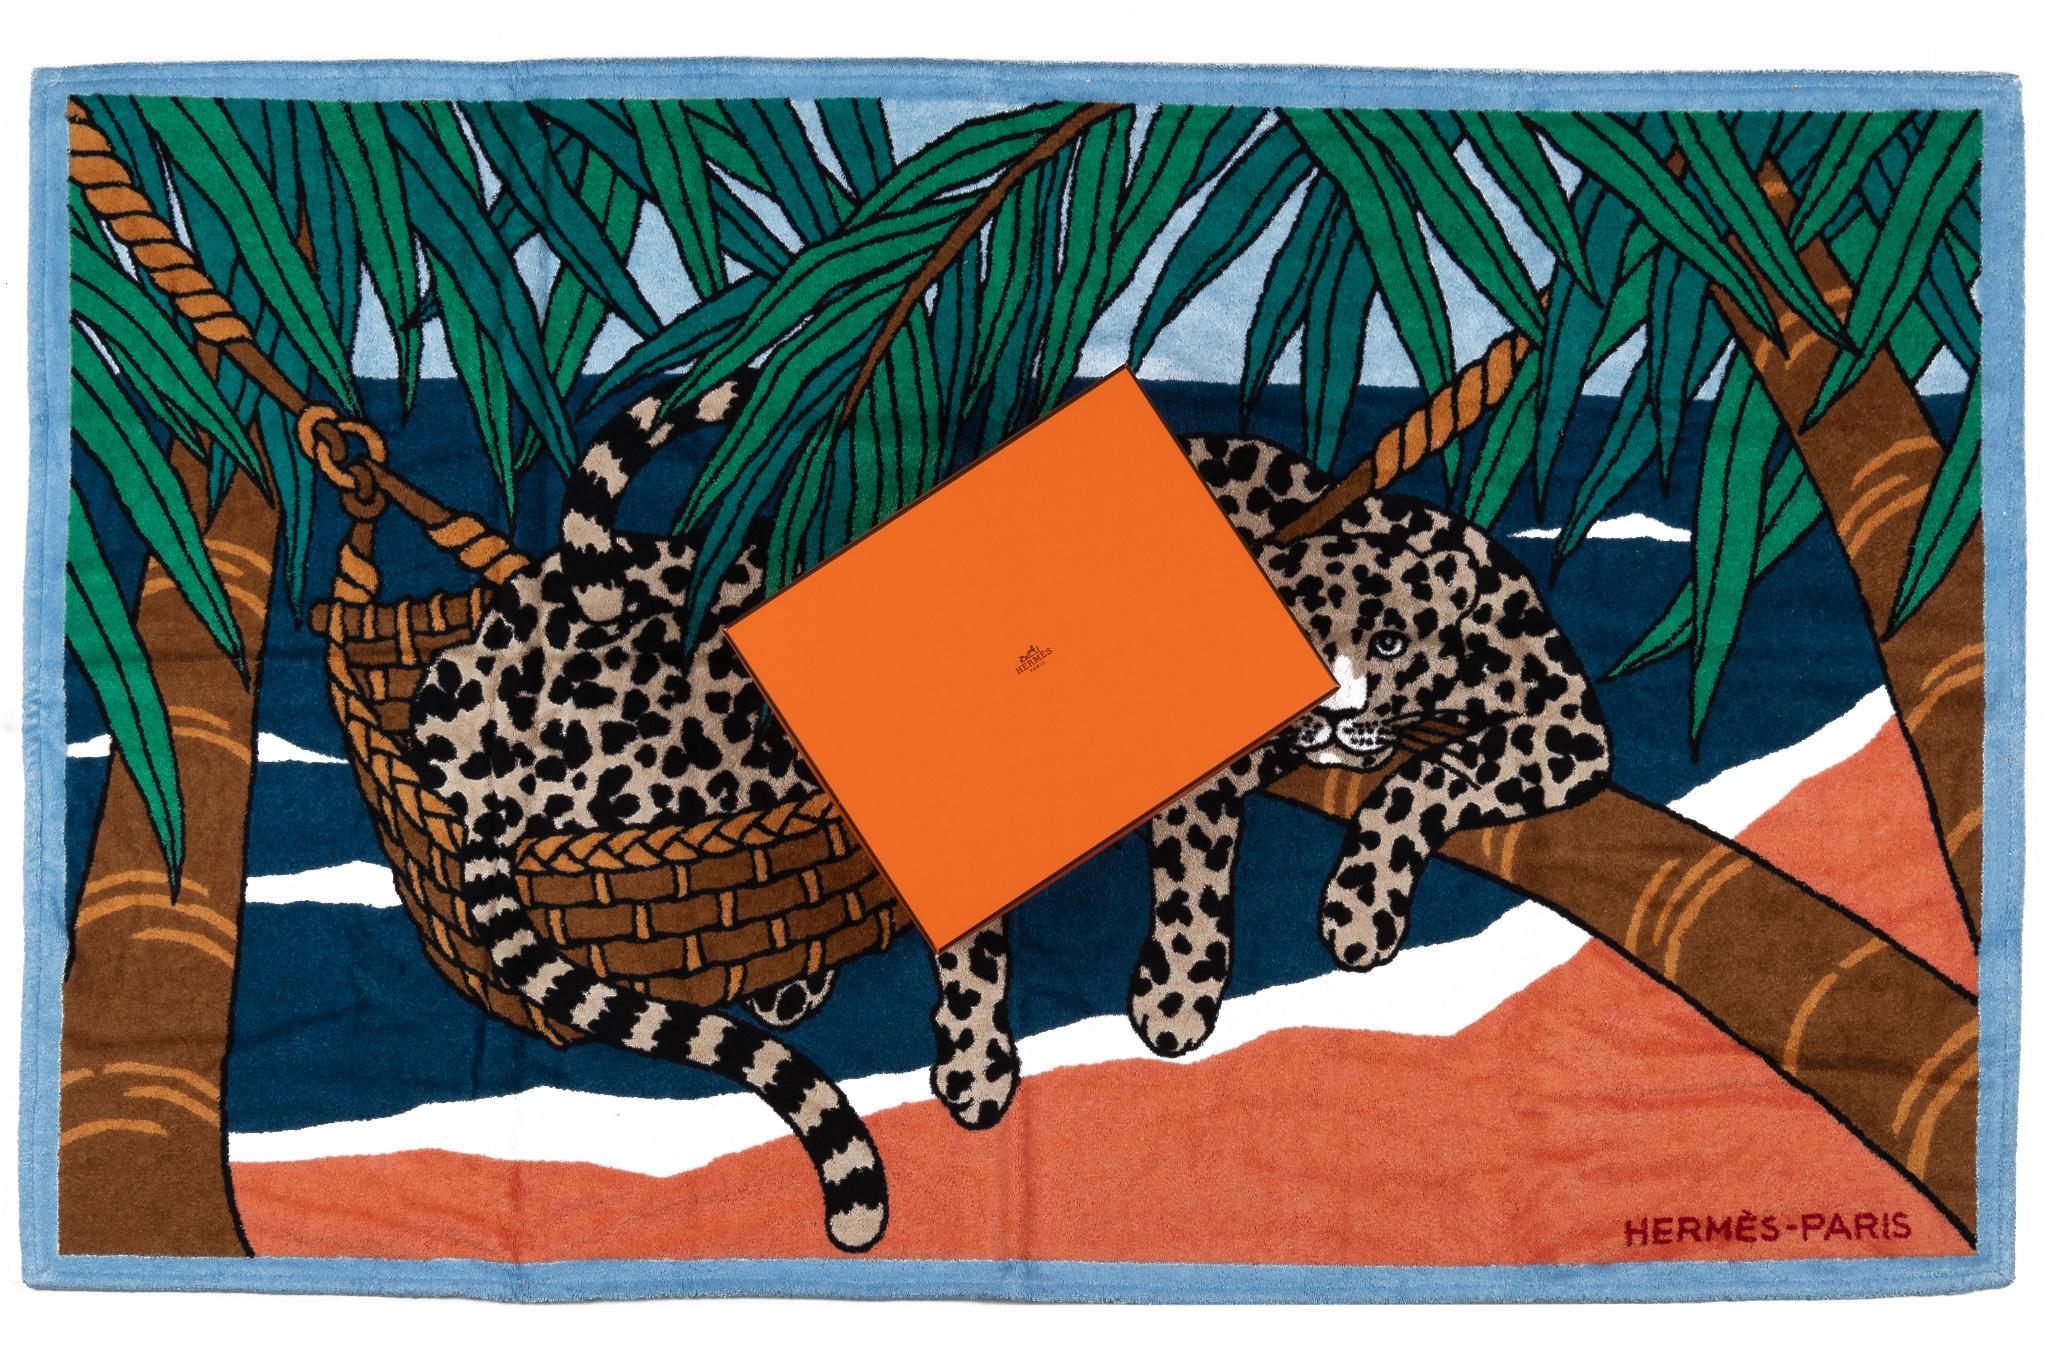 Hermès Leopard Beach Towel in green and blue. The pattern shows two blue leopards in a hammock. The item is in new and comes with the box.